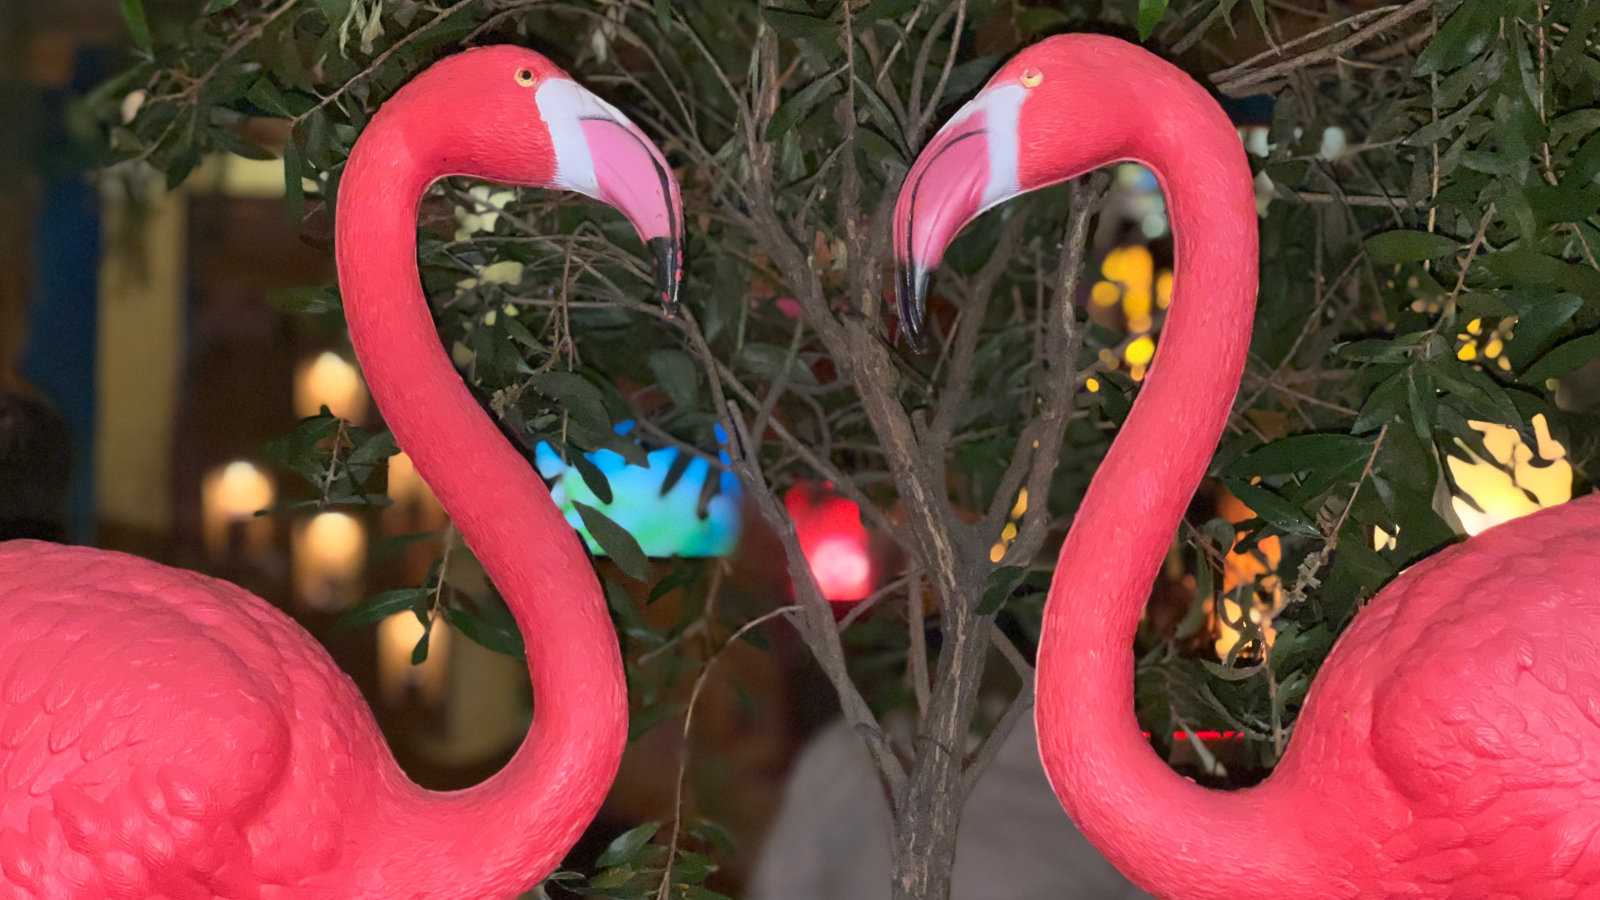 Two plastic pink flamingos facing each other in front of a plant.